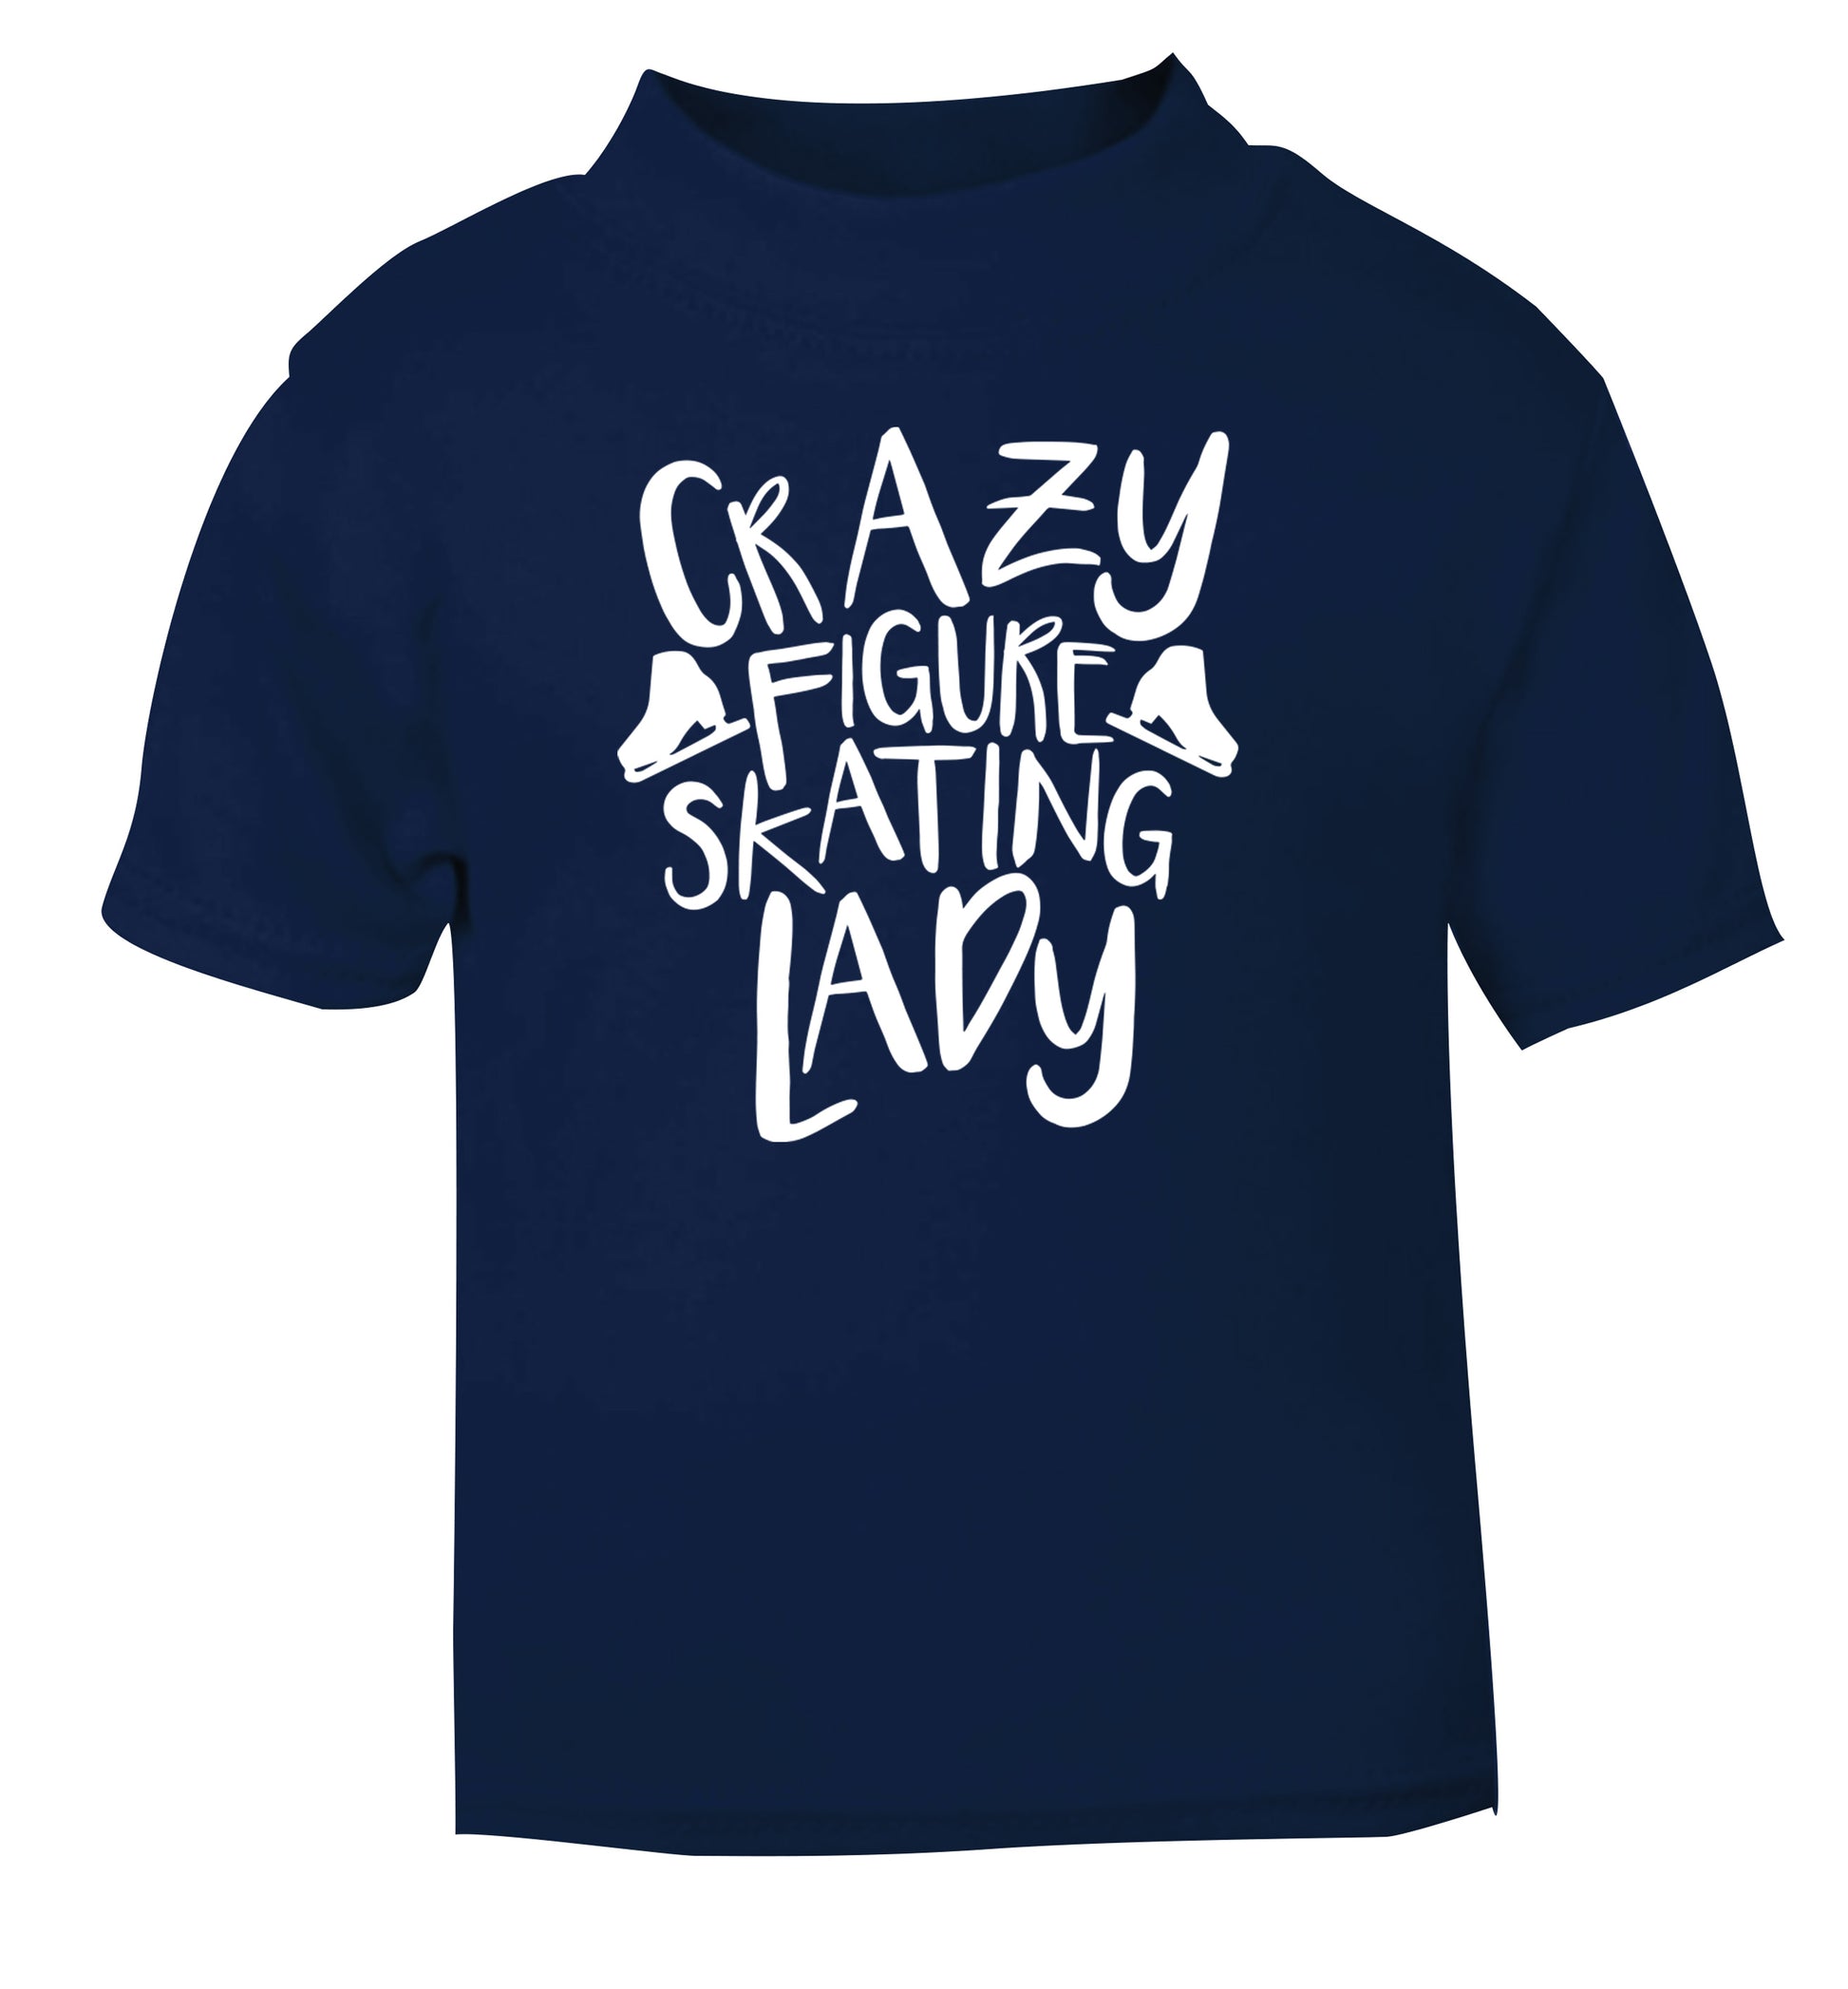 Crazy figure skating lady navy Baby Toddler Tshirt 2 Years